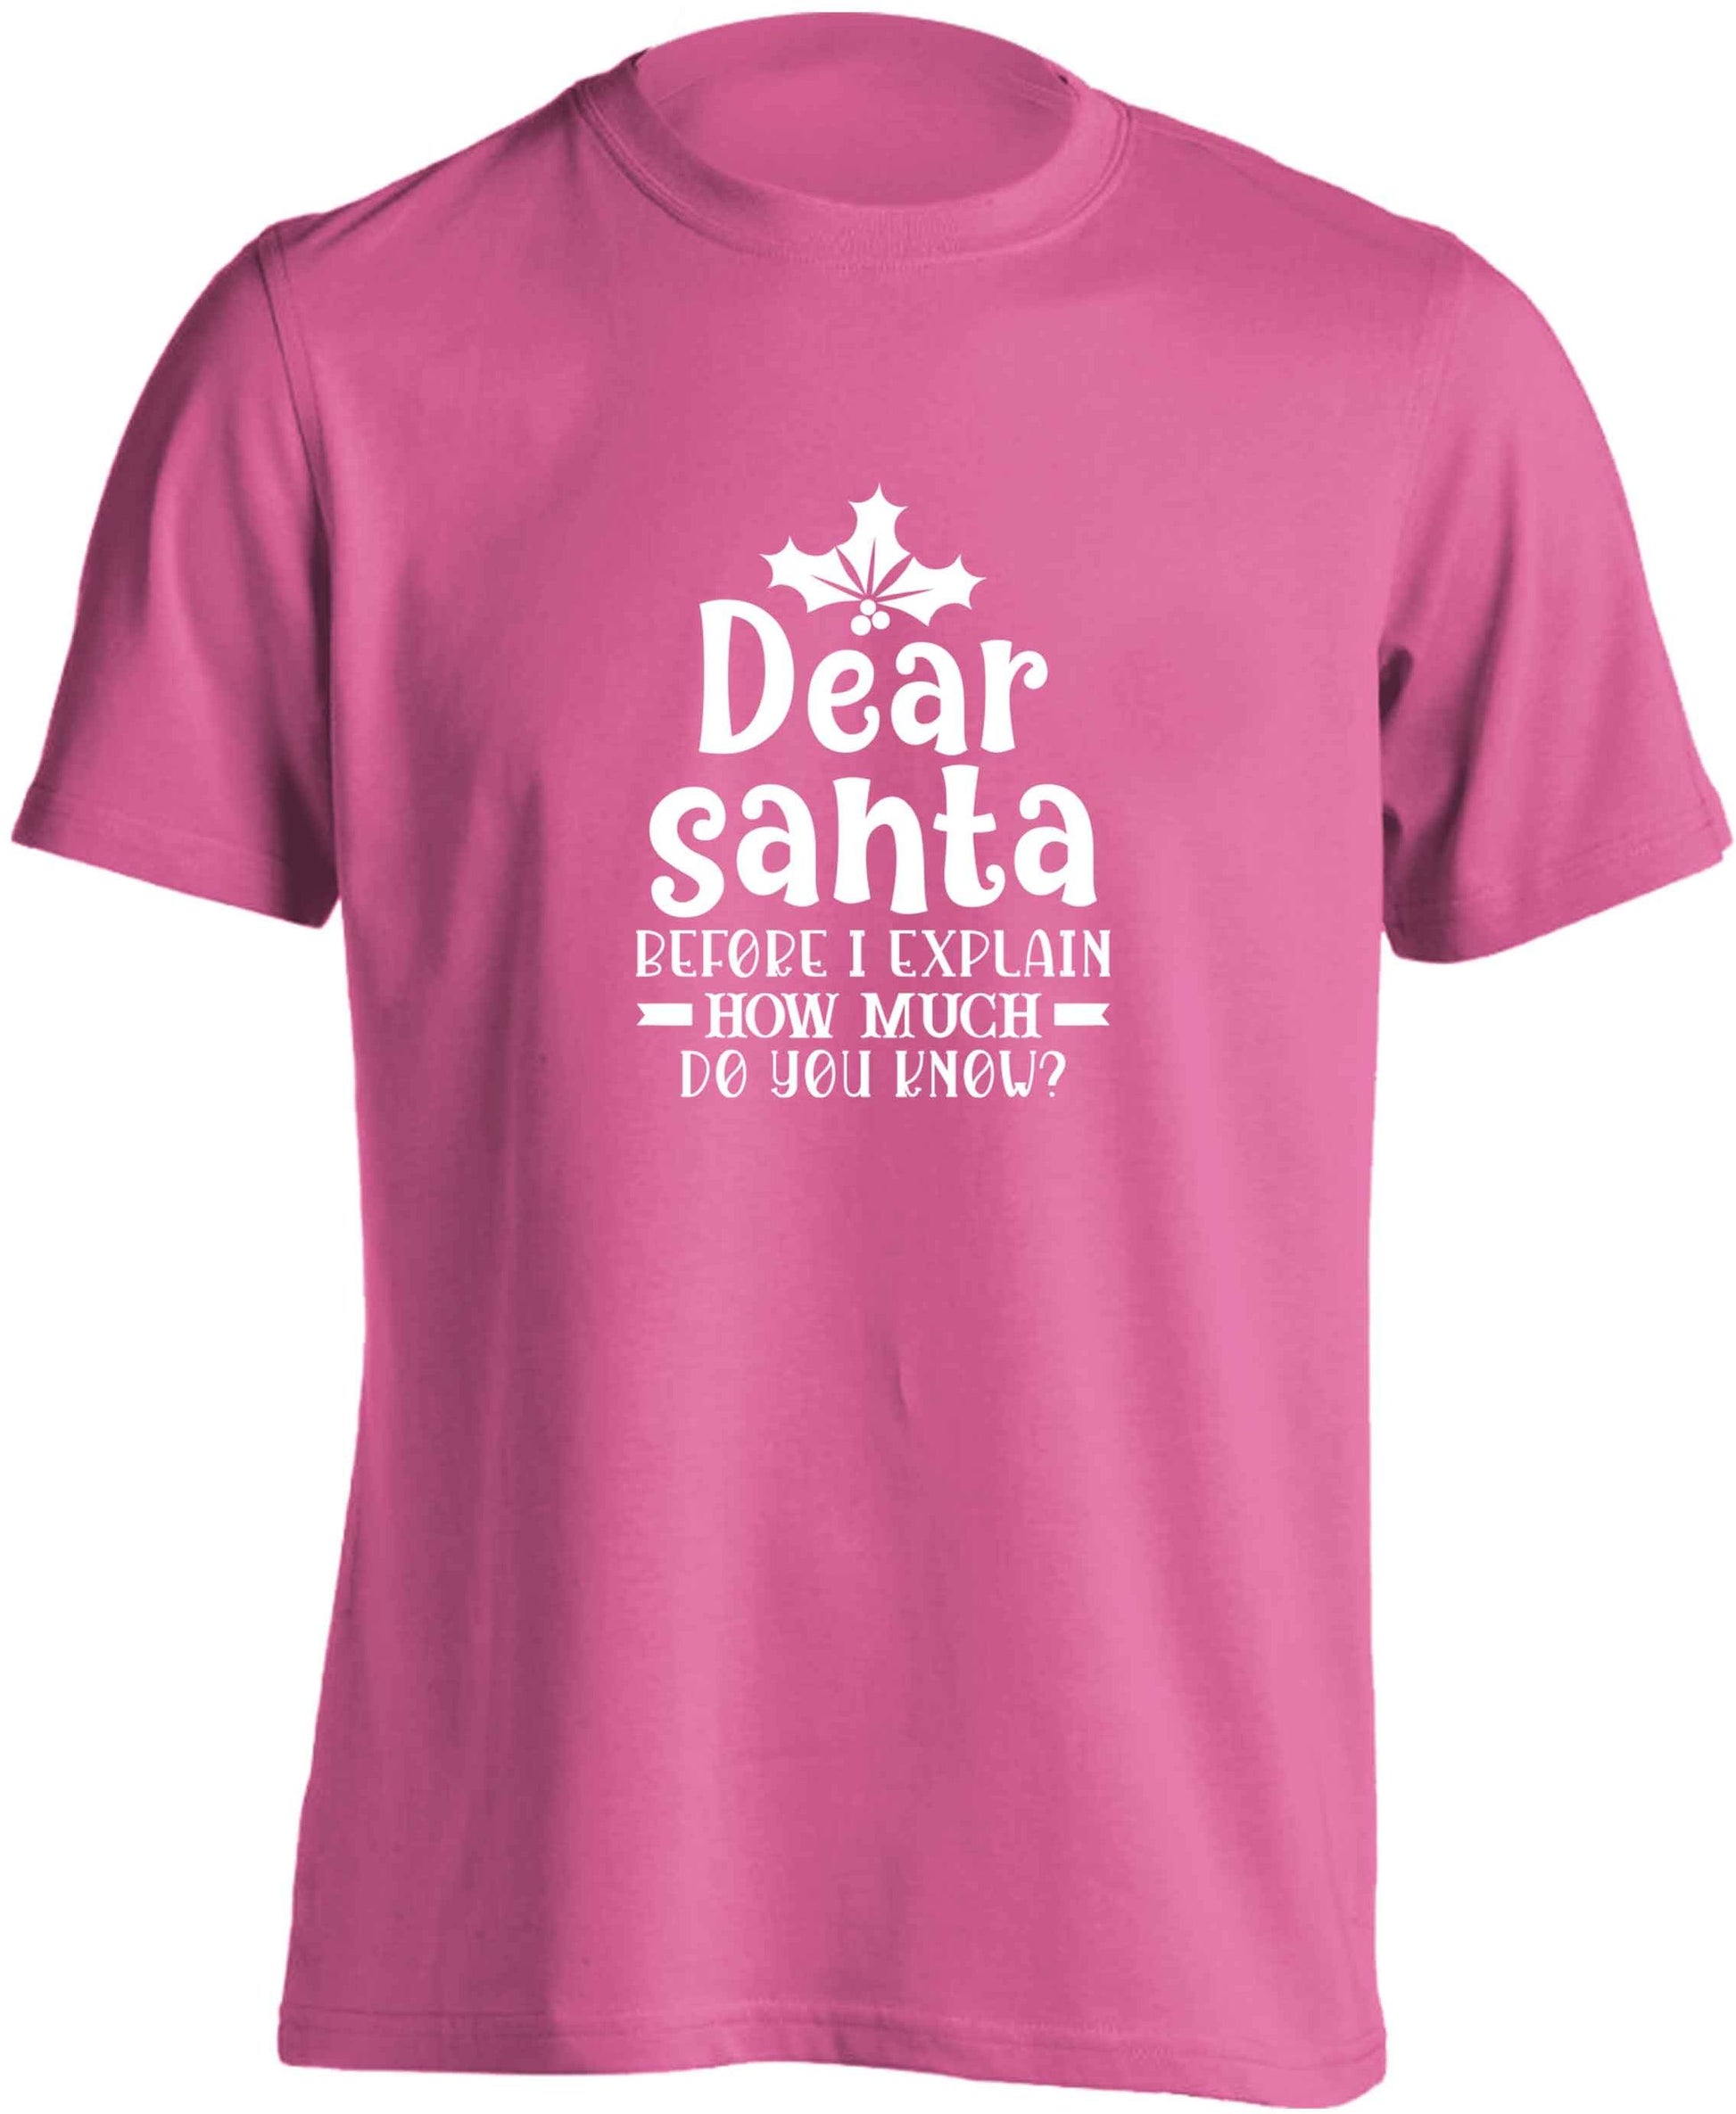 Santa before I explain how much do you know? adults unisex pink Tshirt 2XL